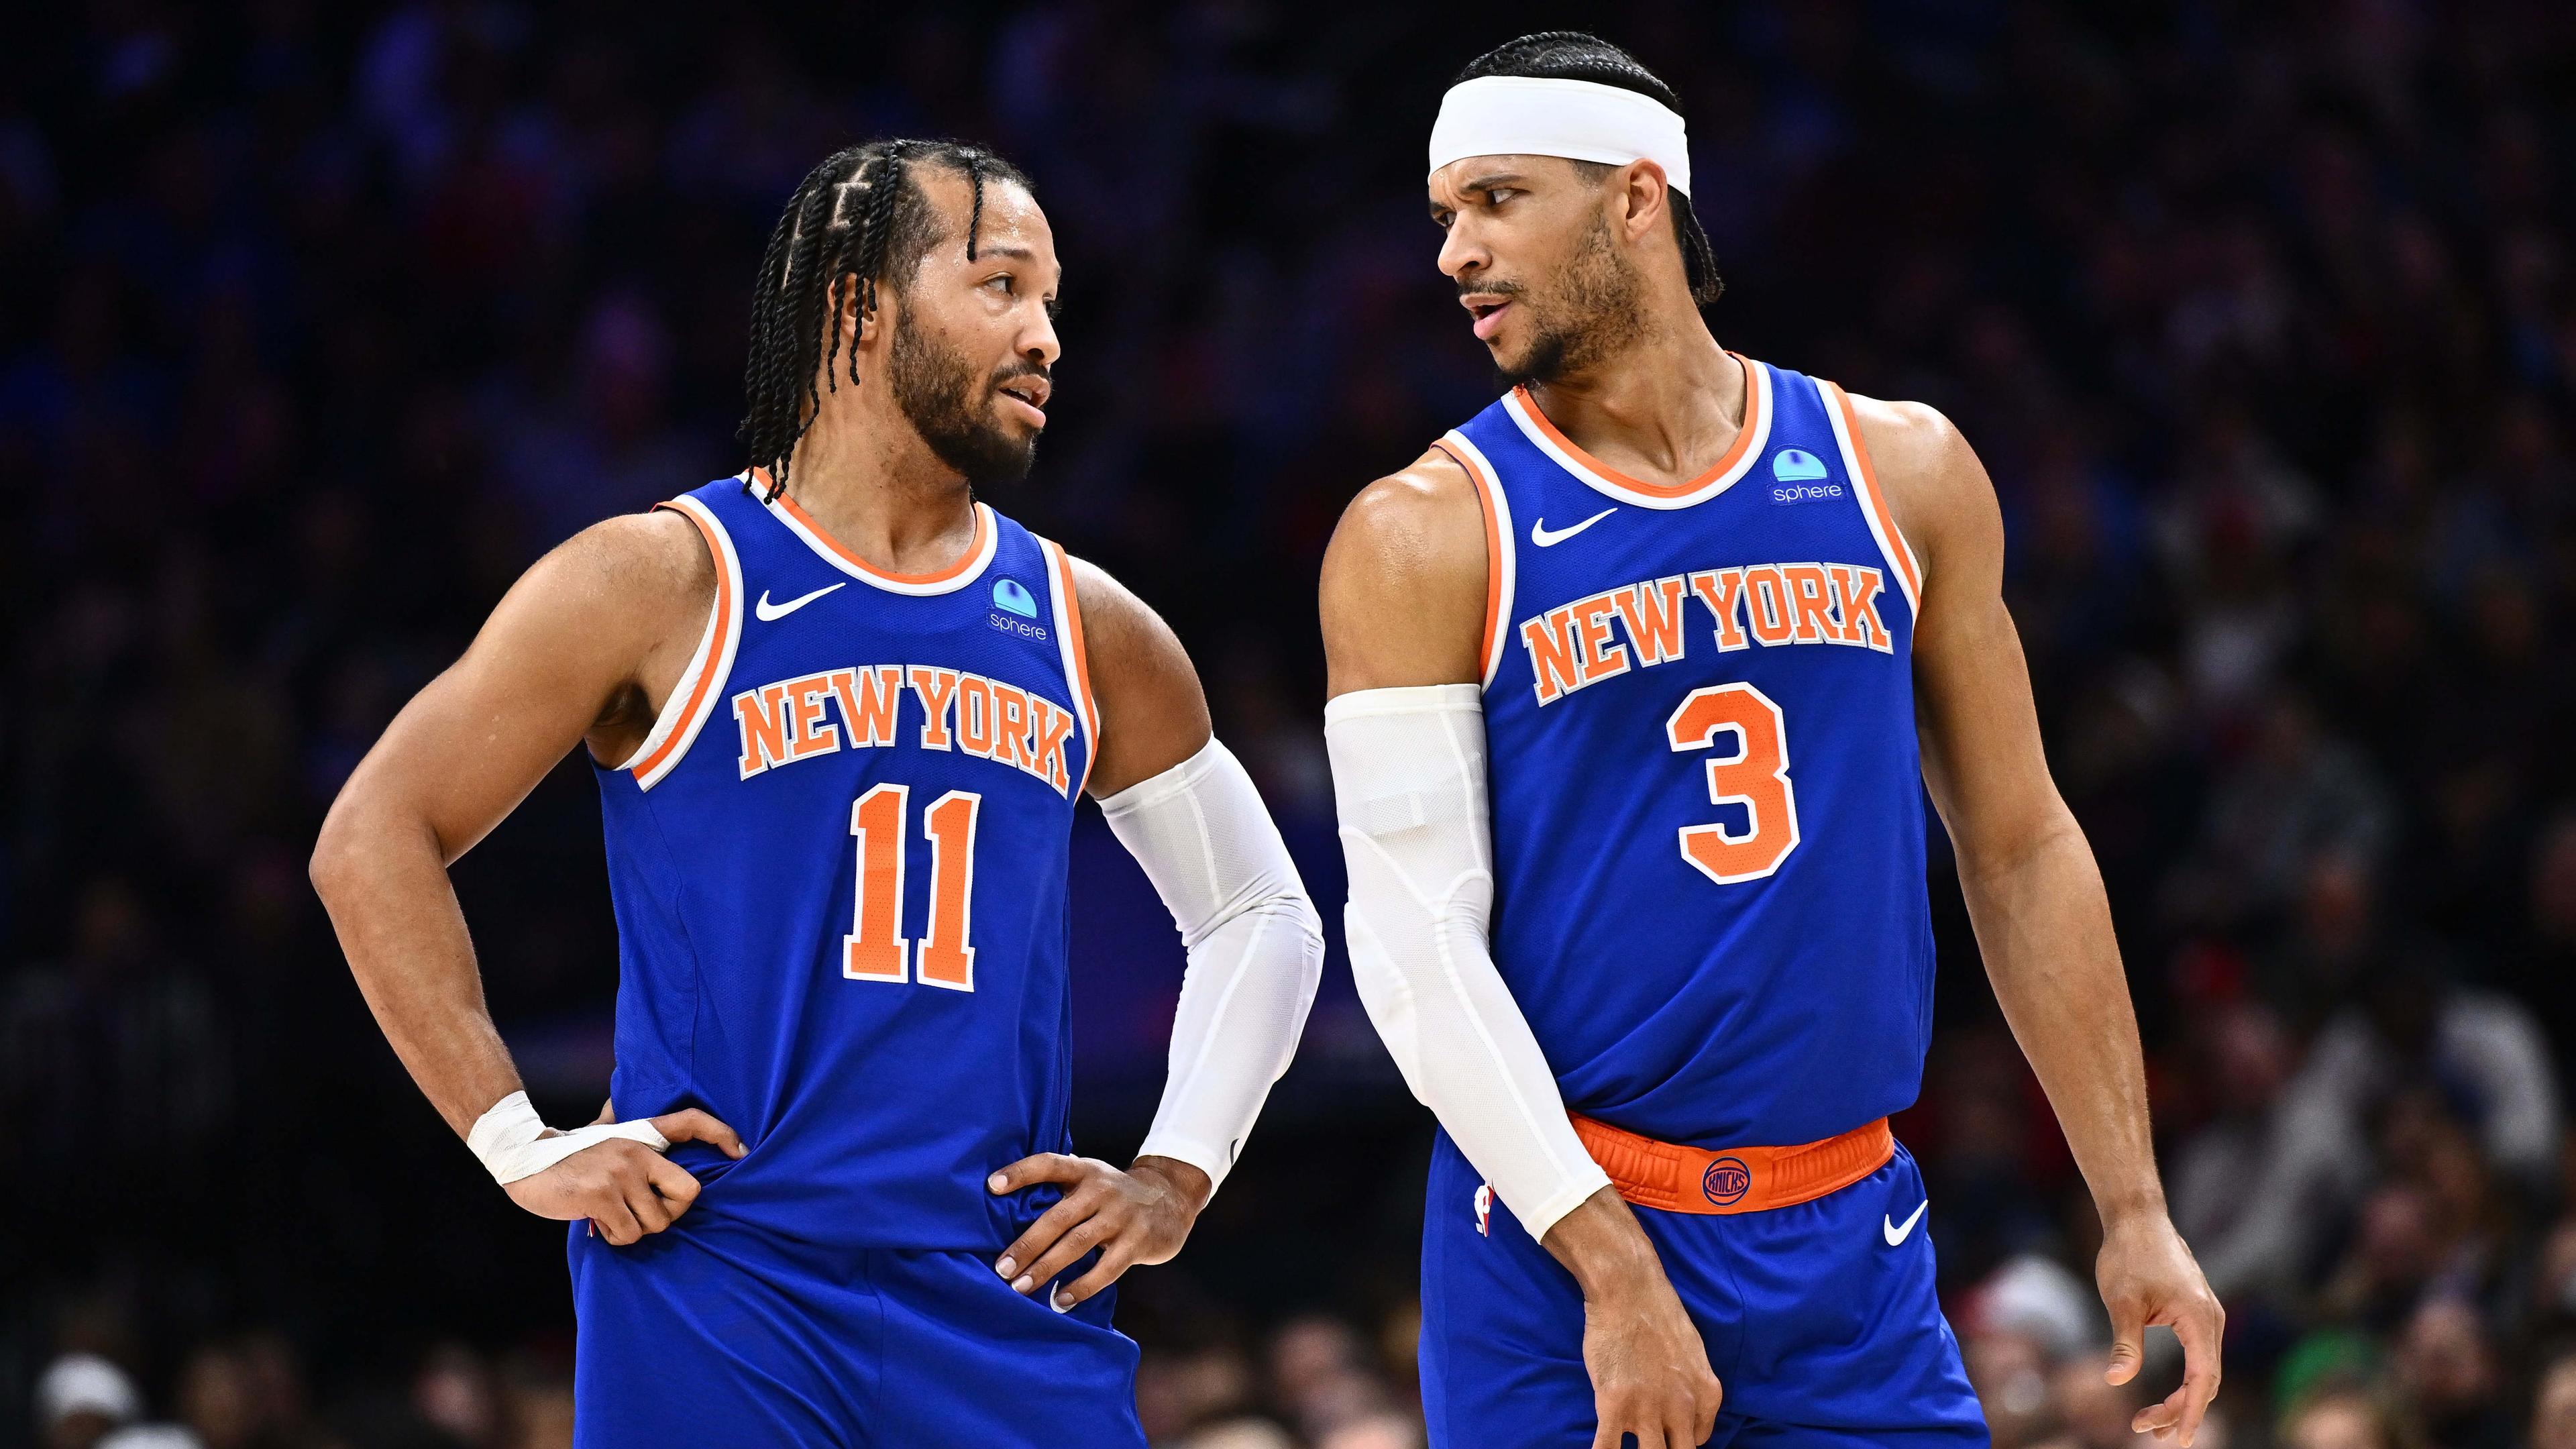 New York Knicks guard Jalen Brunson (11) reacts with guard Josh Hart (3) against the Philadelphia 76ers in the second quarter at Wells Fargo Center / Kyle Ross - USA TODAY Sports